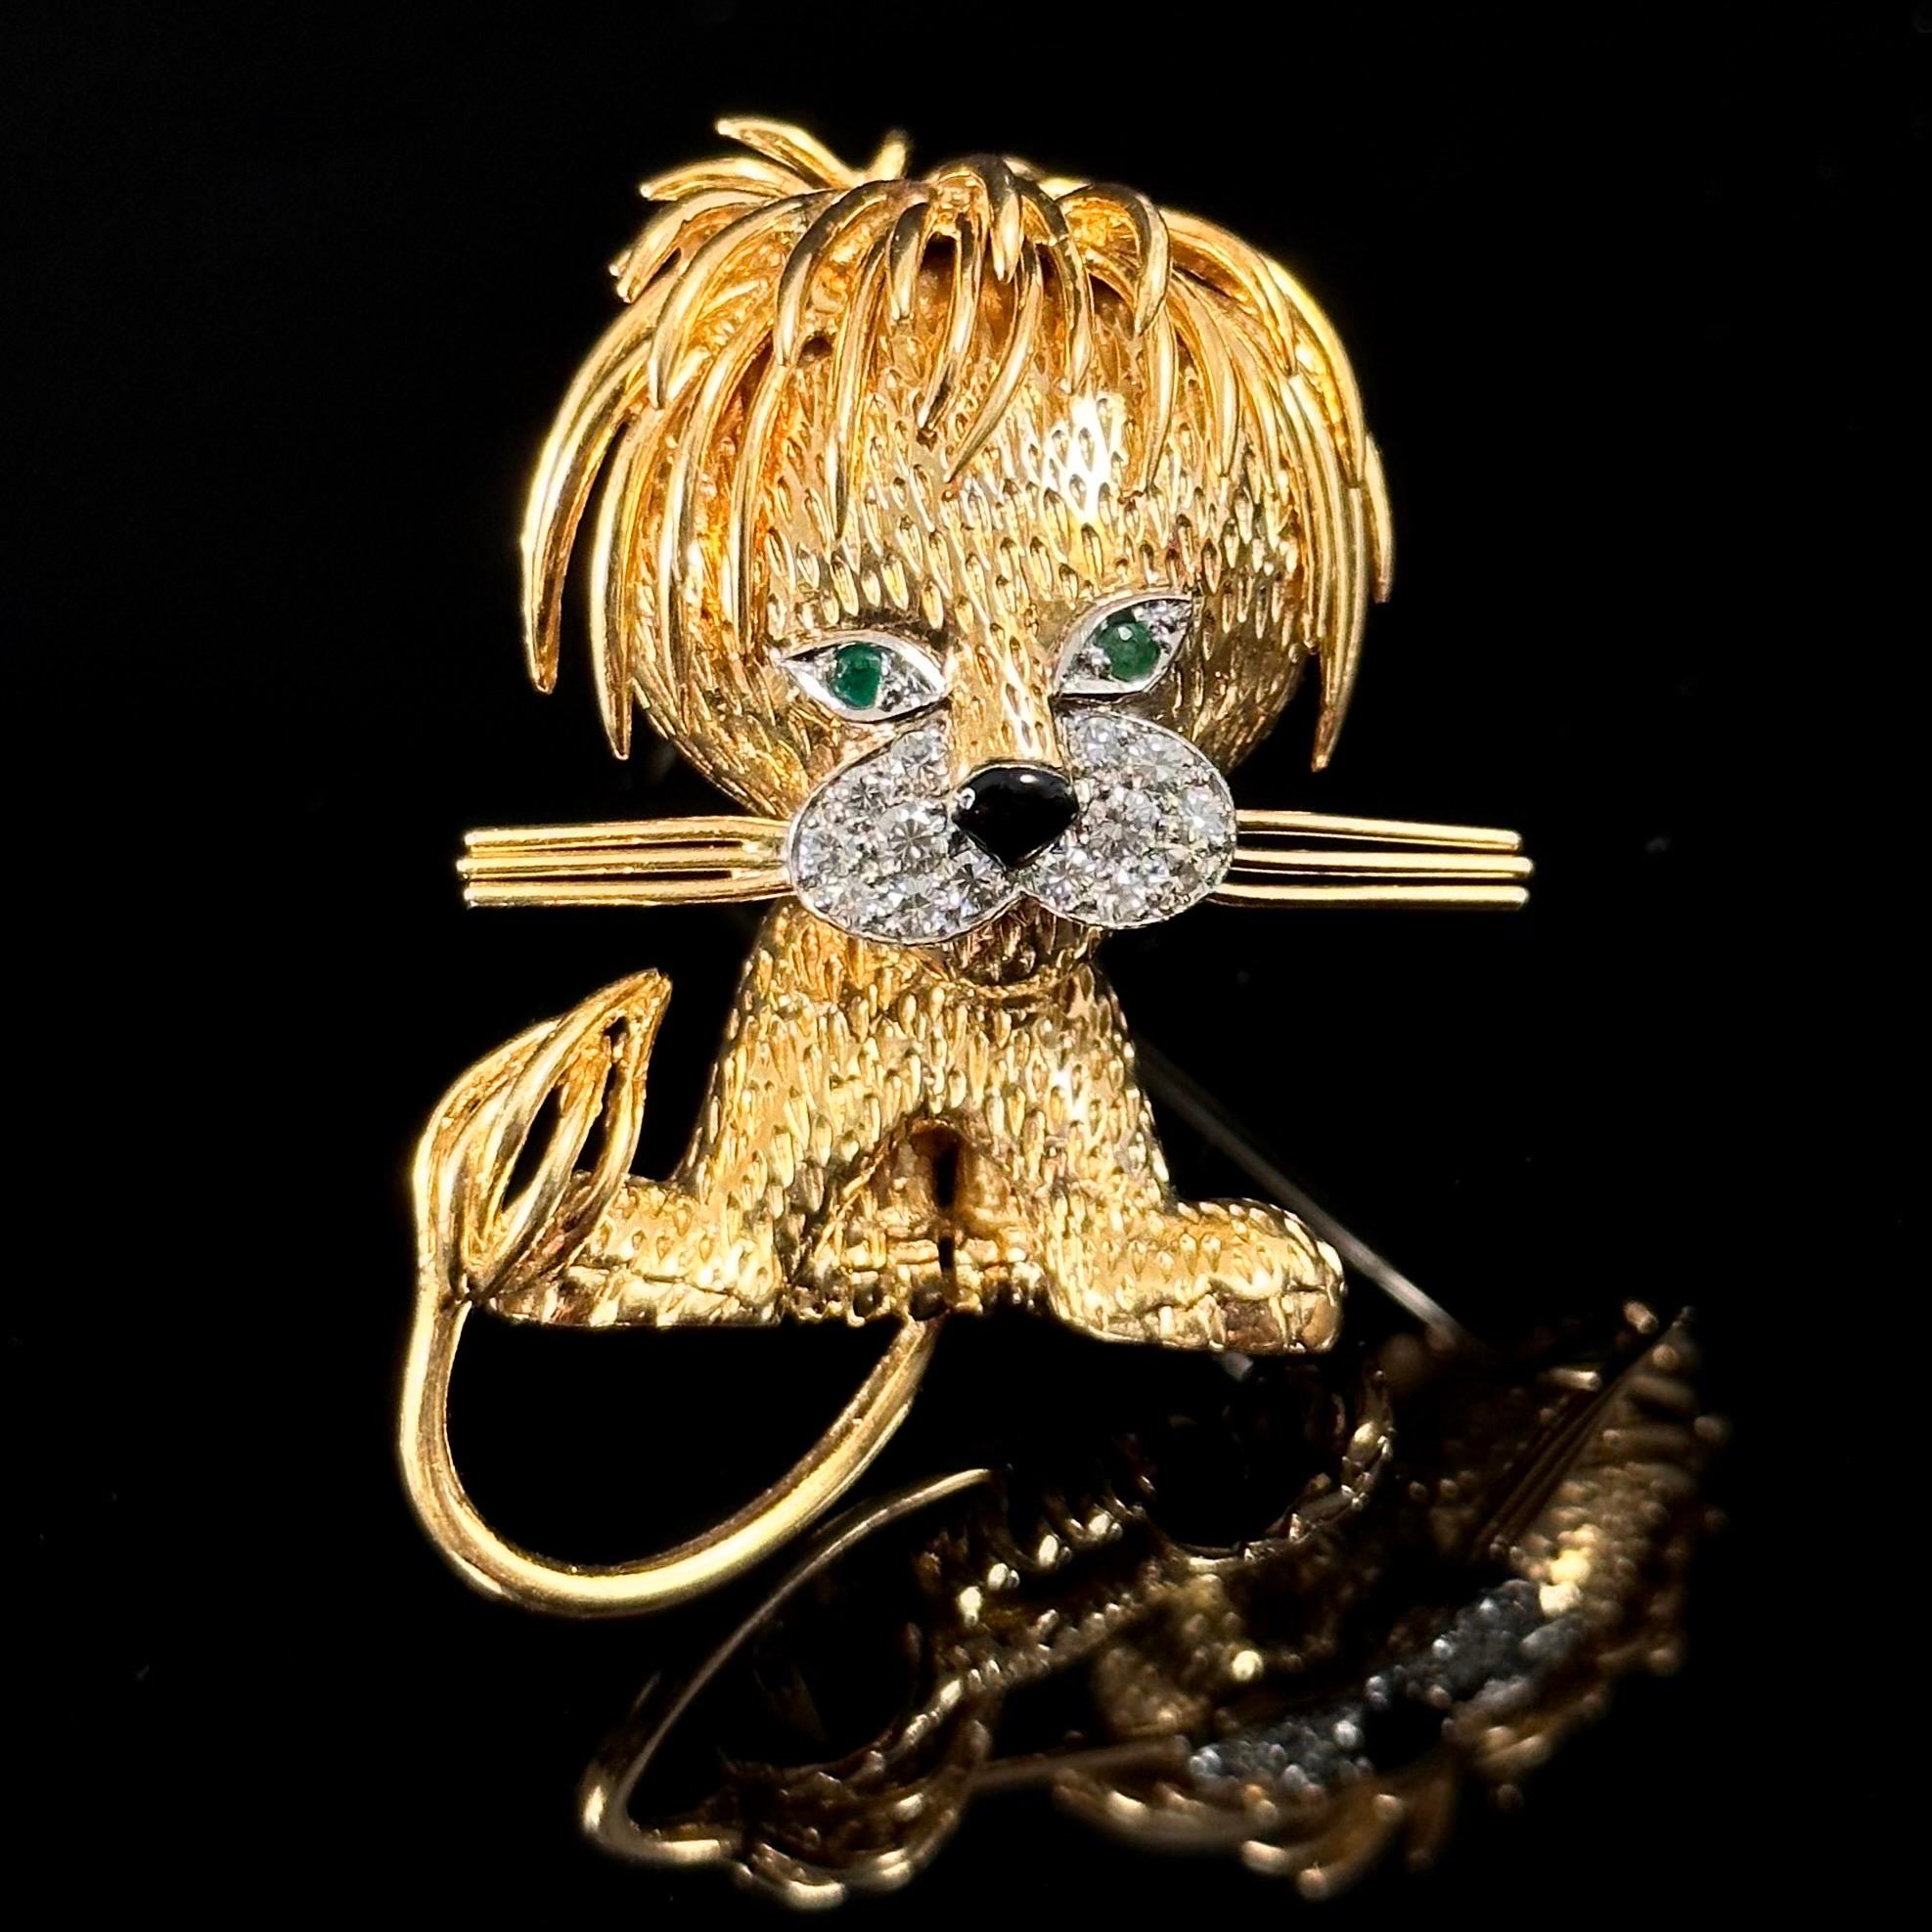 Van Cleef & Arpels (VCA) “Lion Ebouriffé” diamond and emerald brooch in 18kt yellow and white gold, France, by Pery et Cie for VCA, 1960s (circa 1962), with maker’s pouch. With a textured yellow gold body and modelled as a stylized lion cub, the